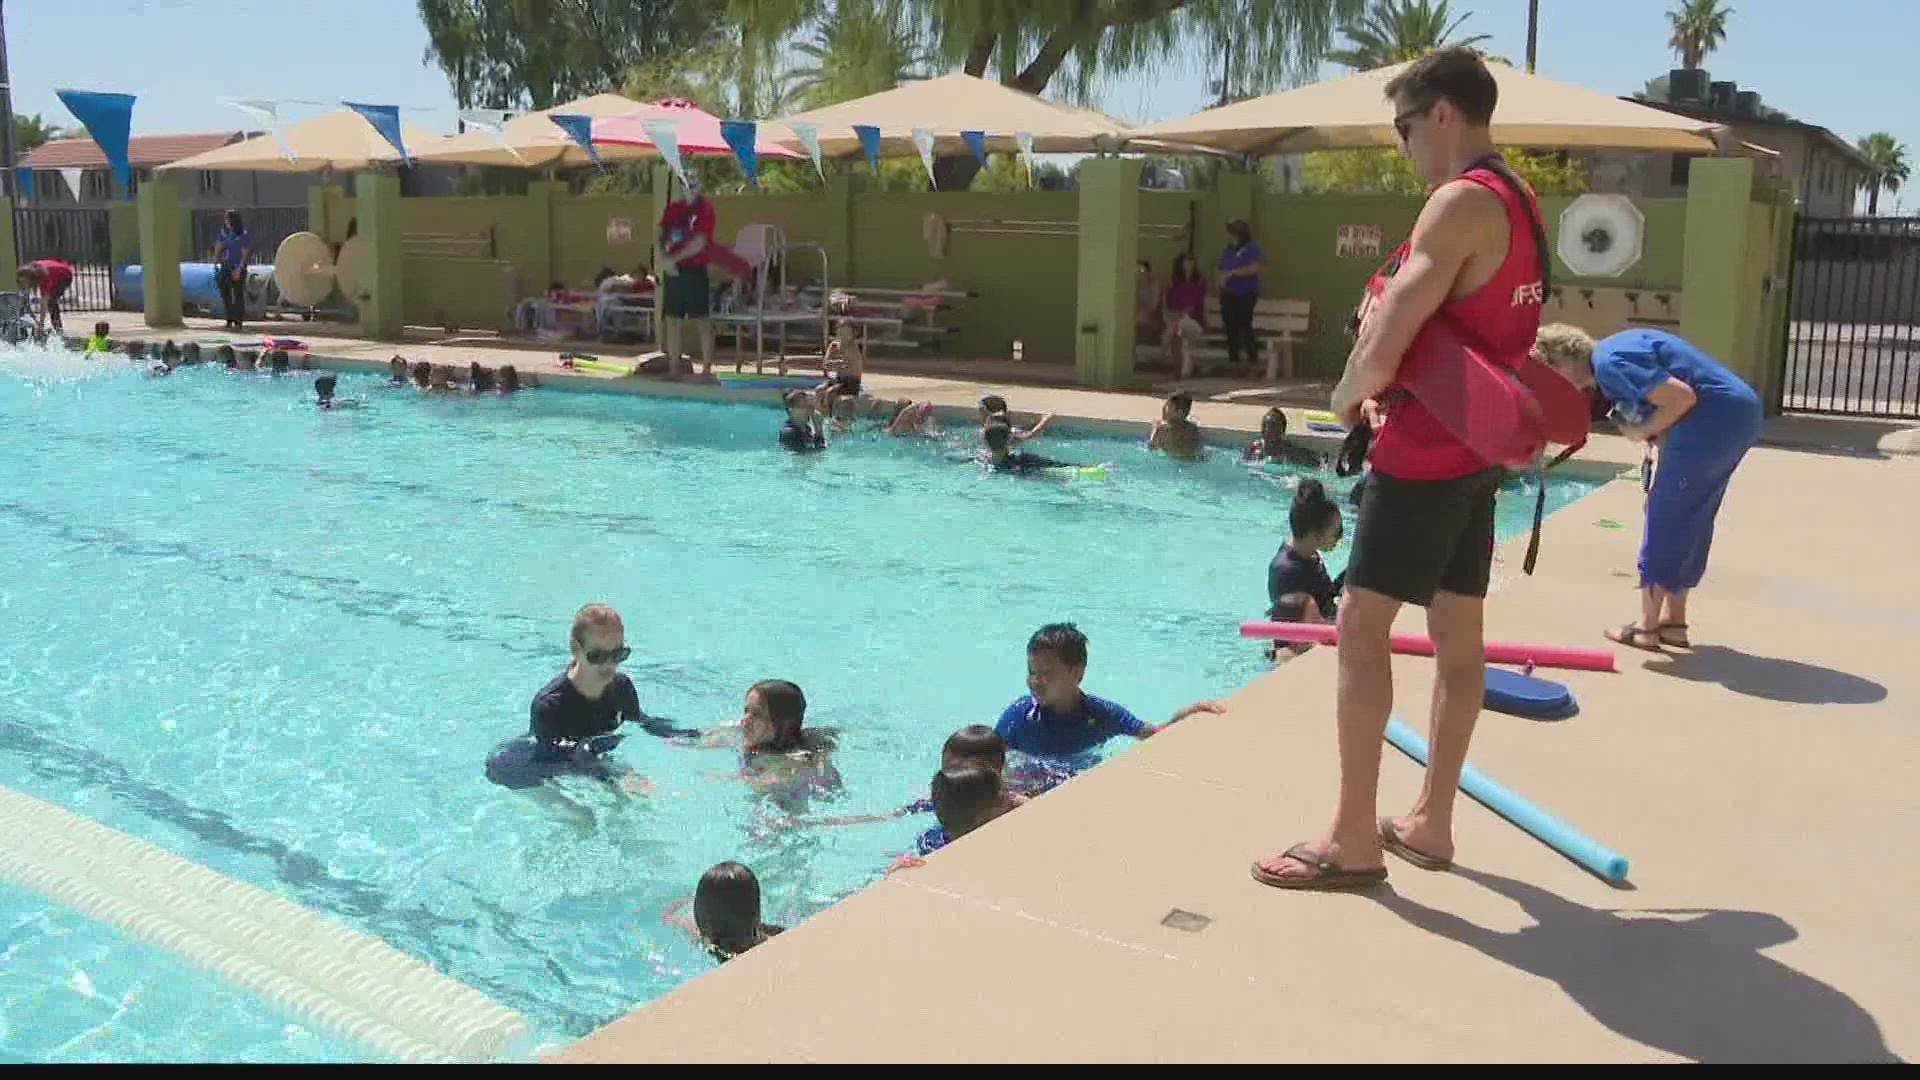 A new water safety campaign, "Drowning Zero", is taking off in Phoenix. The goal of the campaign is, of course, zero drownings.